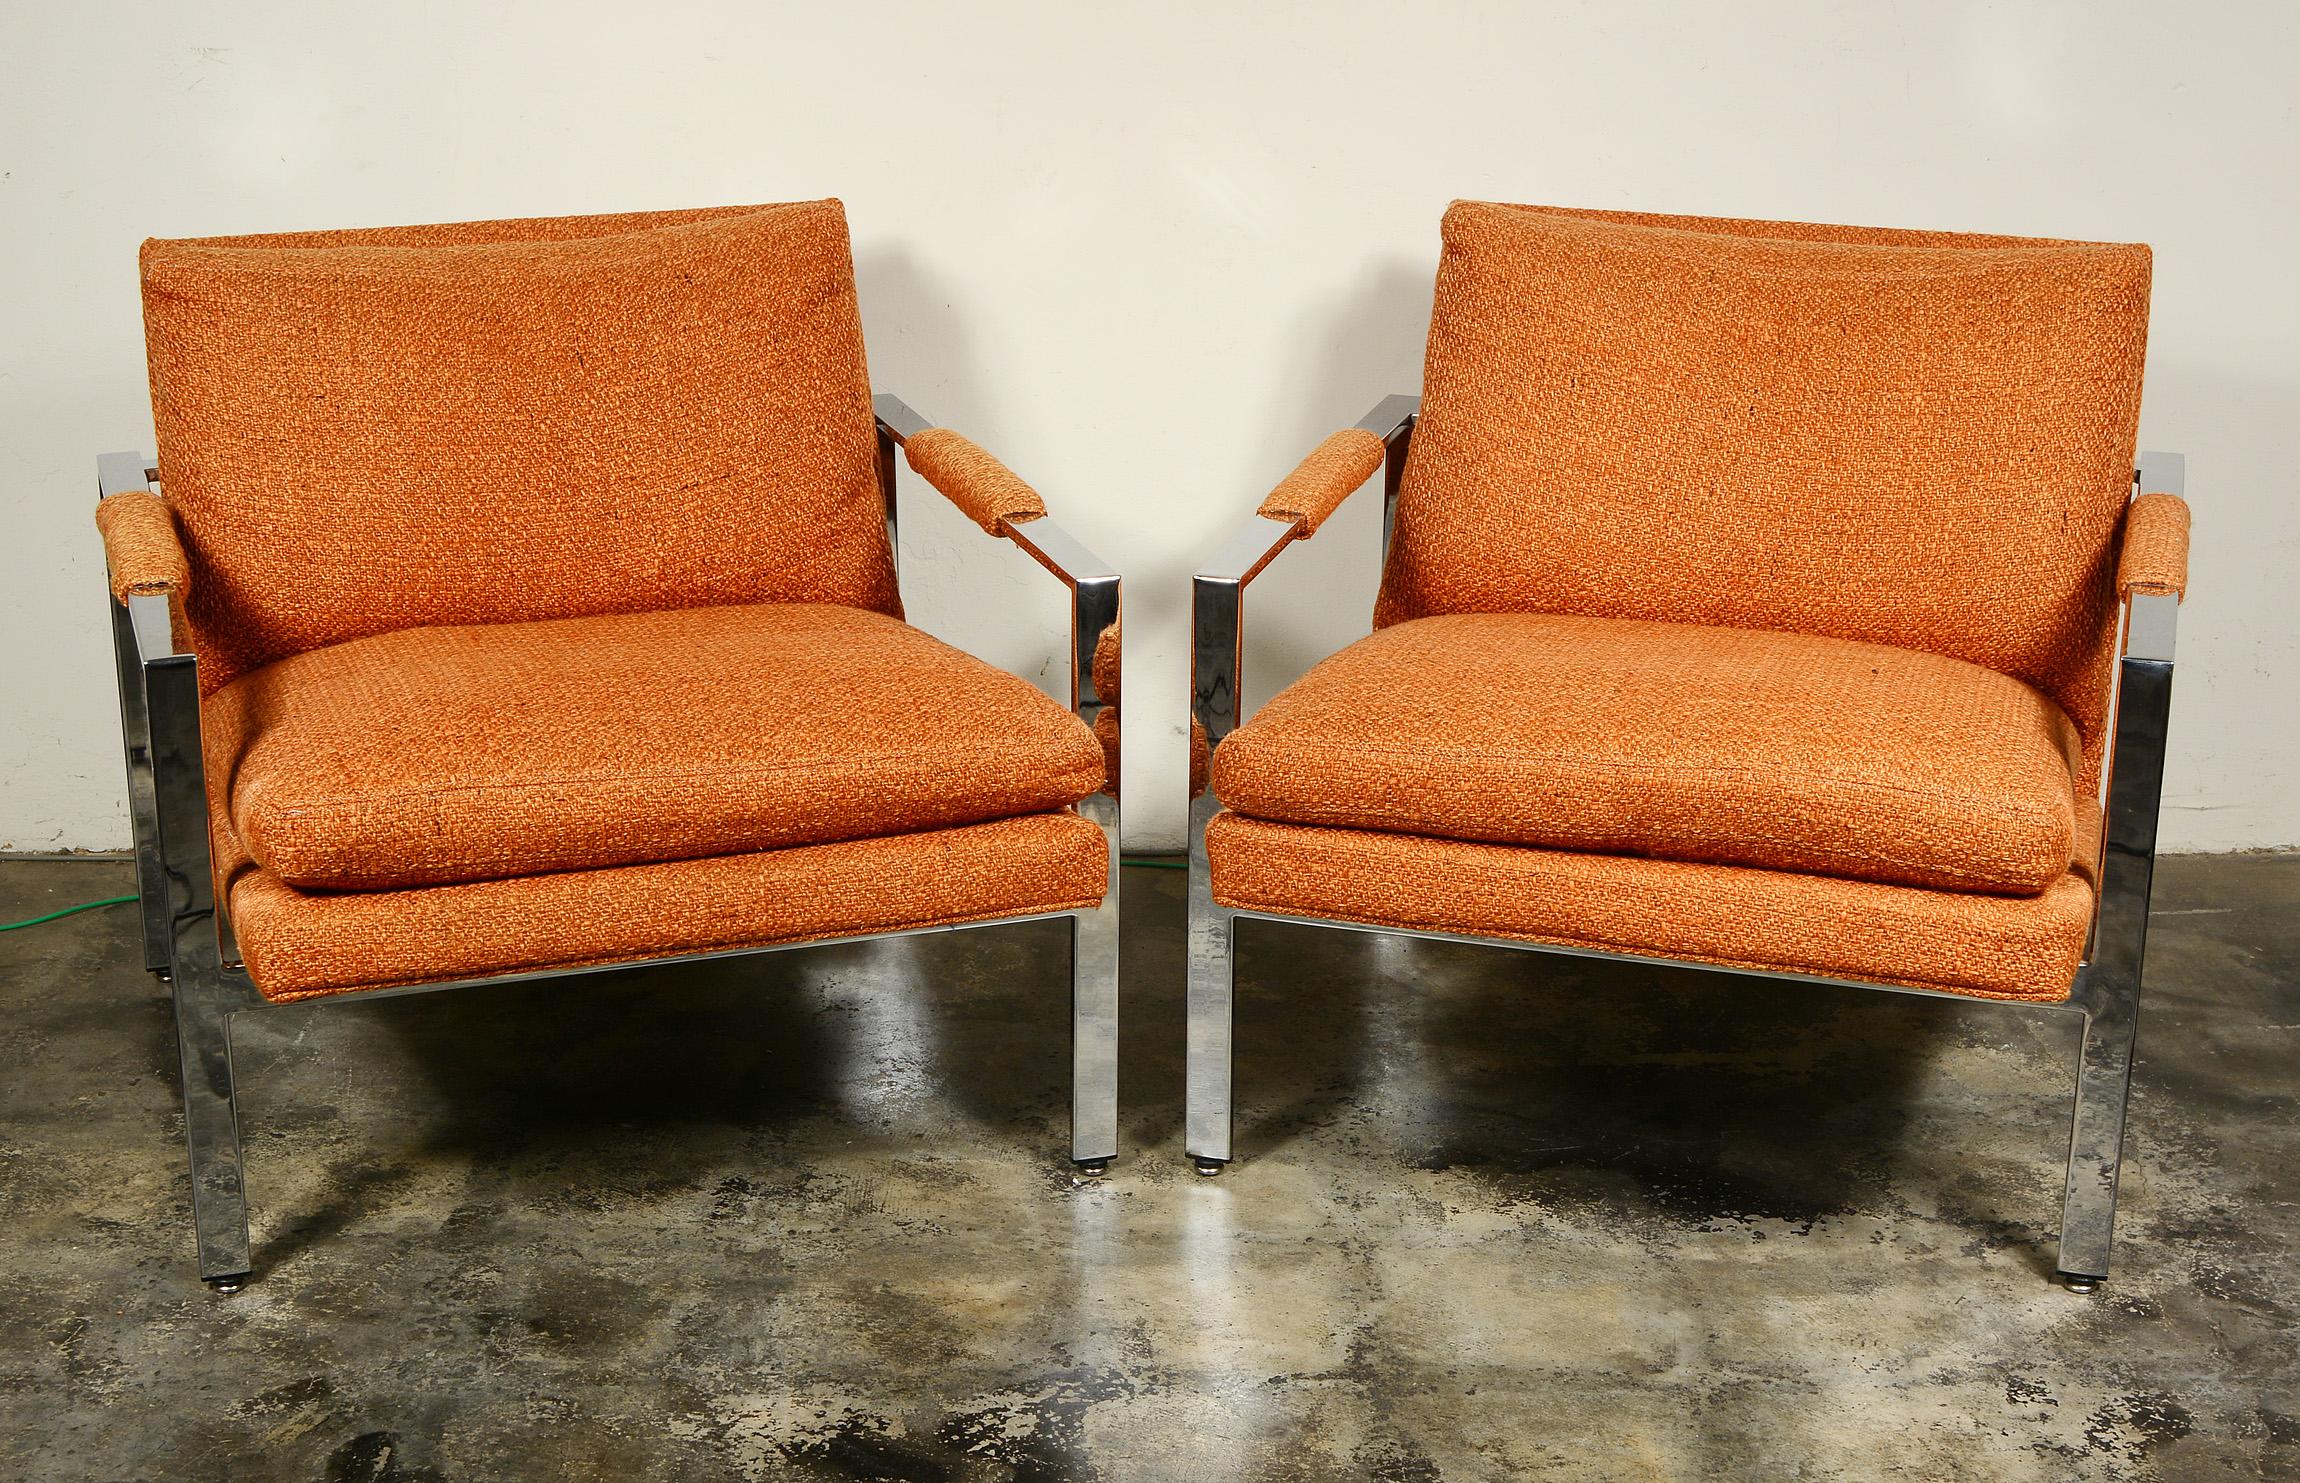 Pair of flat chrome bar lounge chairs designed by Milo Baughman for Thayer Coggin. These low profile chairs sit very comfortably. These retain the original upholstery. It has faded in areas but is usable as is. We would recommend new upholstery